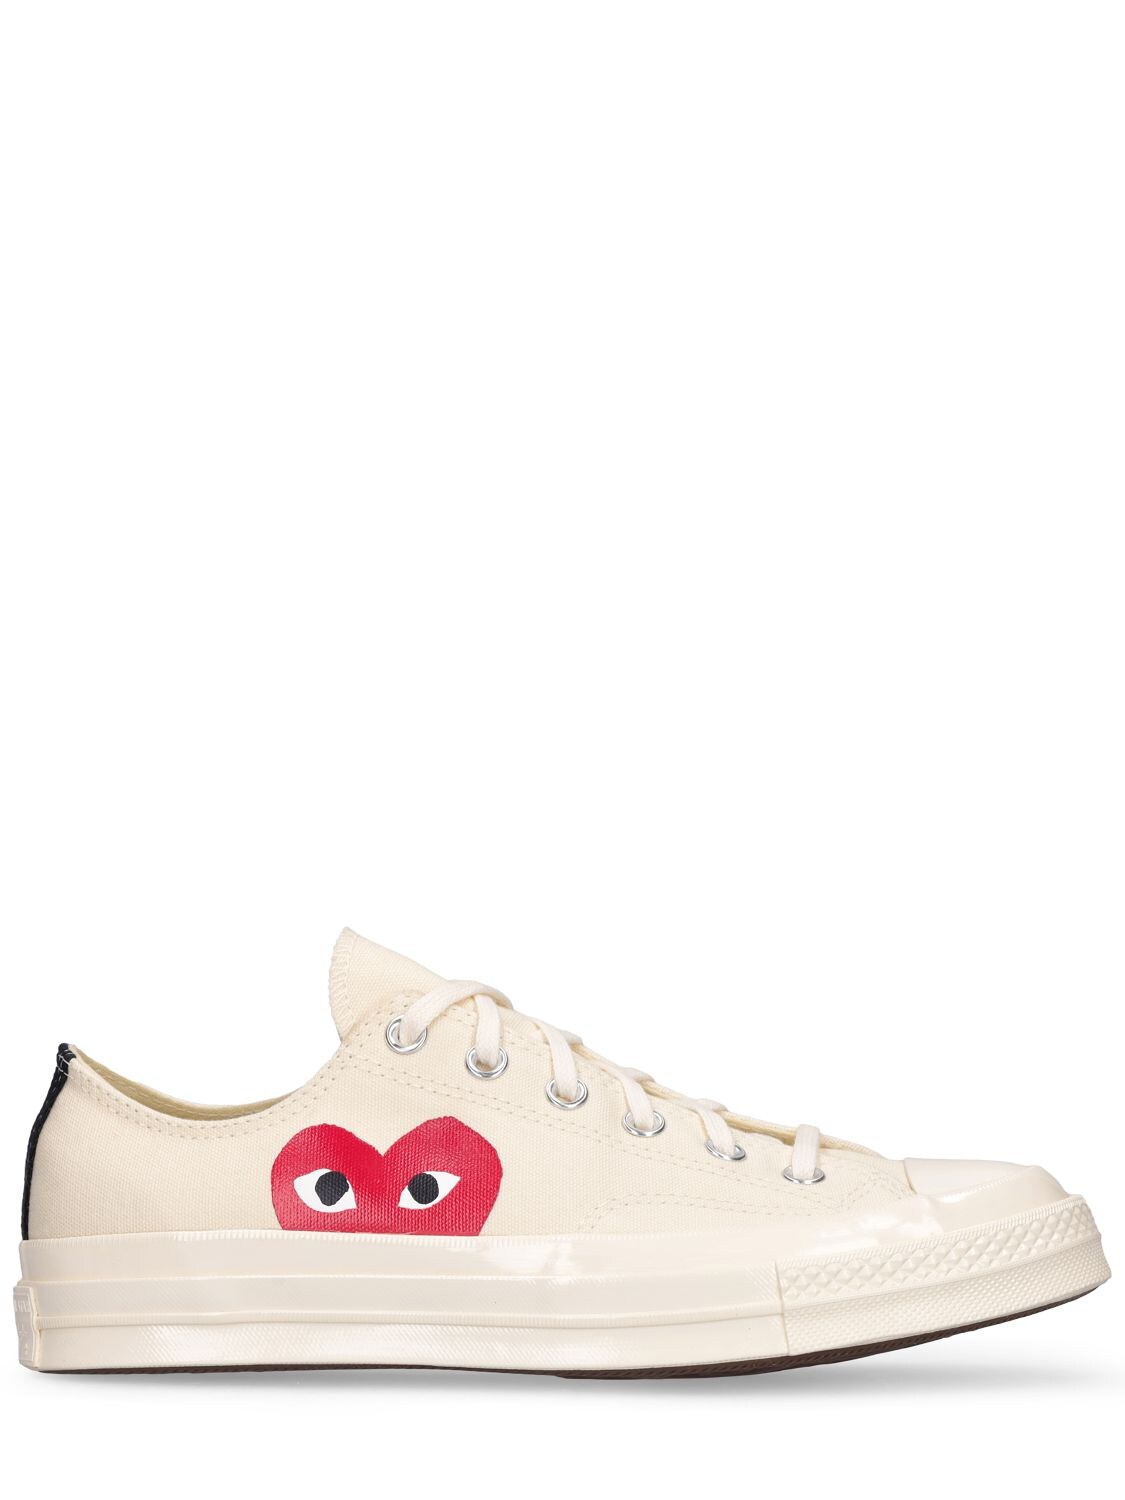 Comme Des Garçons Play 20mm Play Converse Cotton Sneakers In White